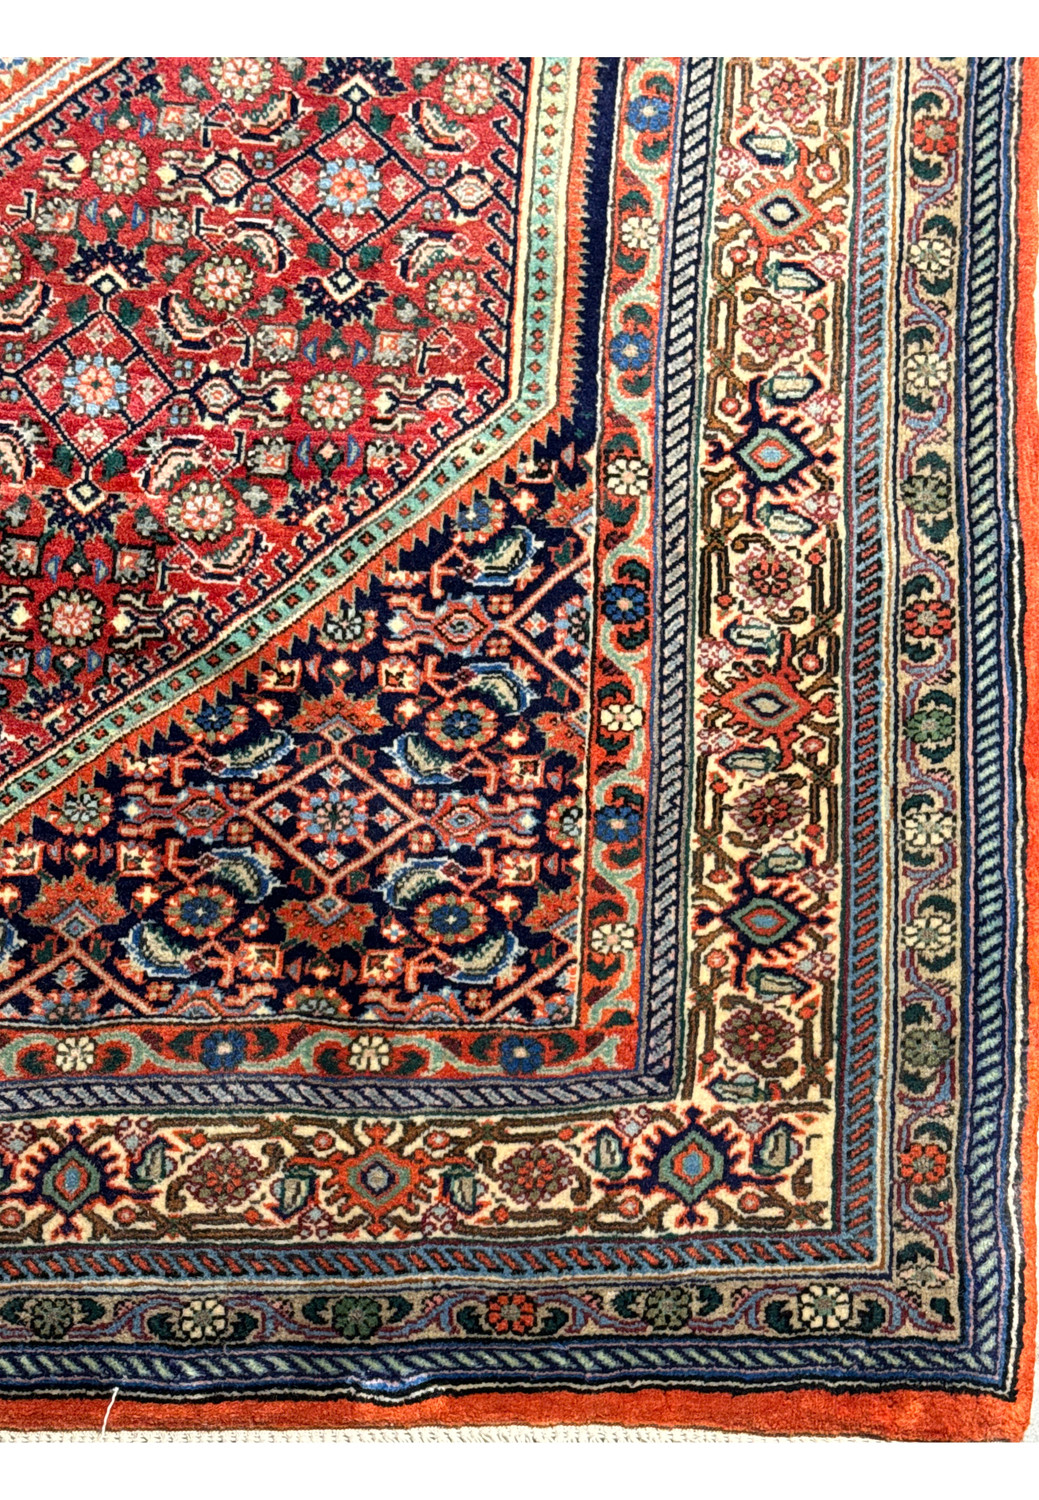 A close-up shot of the upper half of a Persian Bijar rug, focusing on the detailed border and the fine patterns woven against the red background.